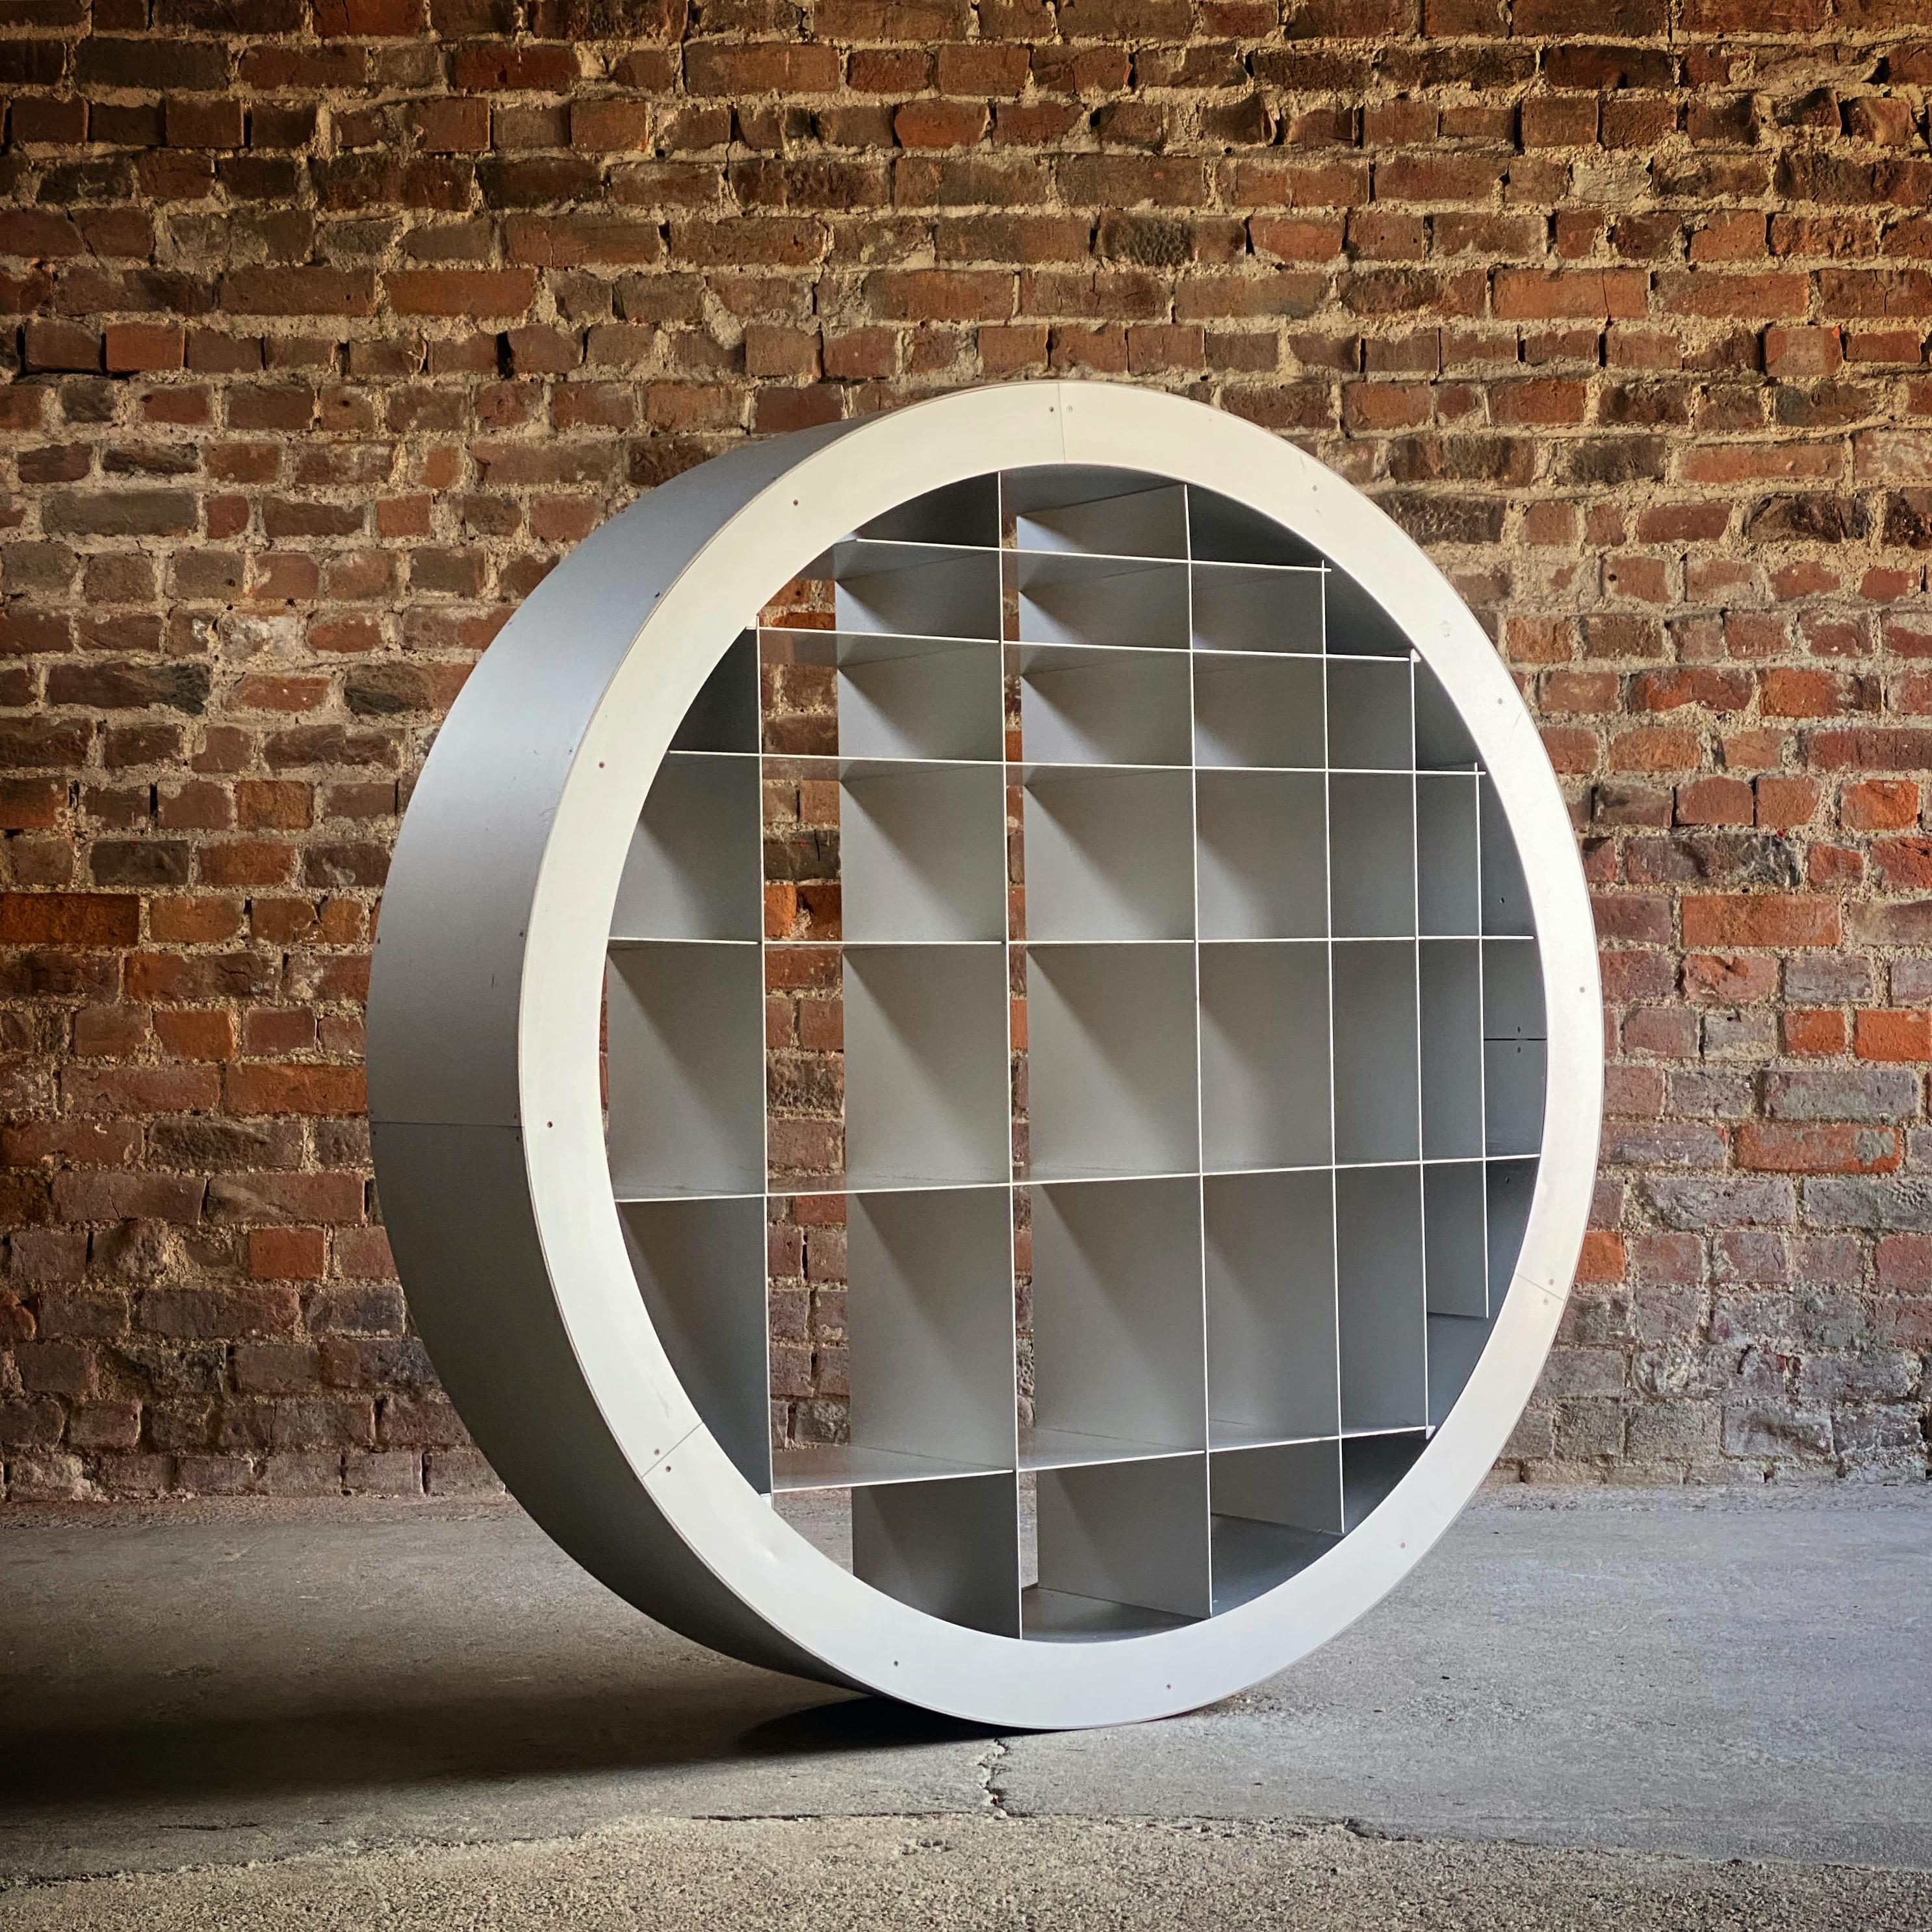 Ron Arad R.T.W. ‘Reinventing the Wheel' Bookcase by Hidden 2000

The R.T.W. or ‘Reinventing the Wheel' was designed by Ron Arad in 1996, the anodised aluminium rotating circular bookcase has shelves that they will always remain in a horizontal